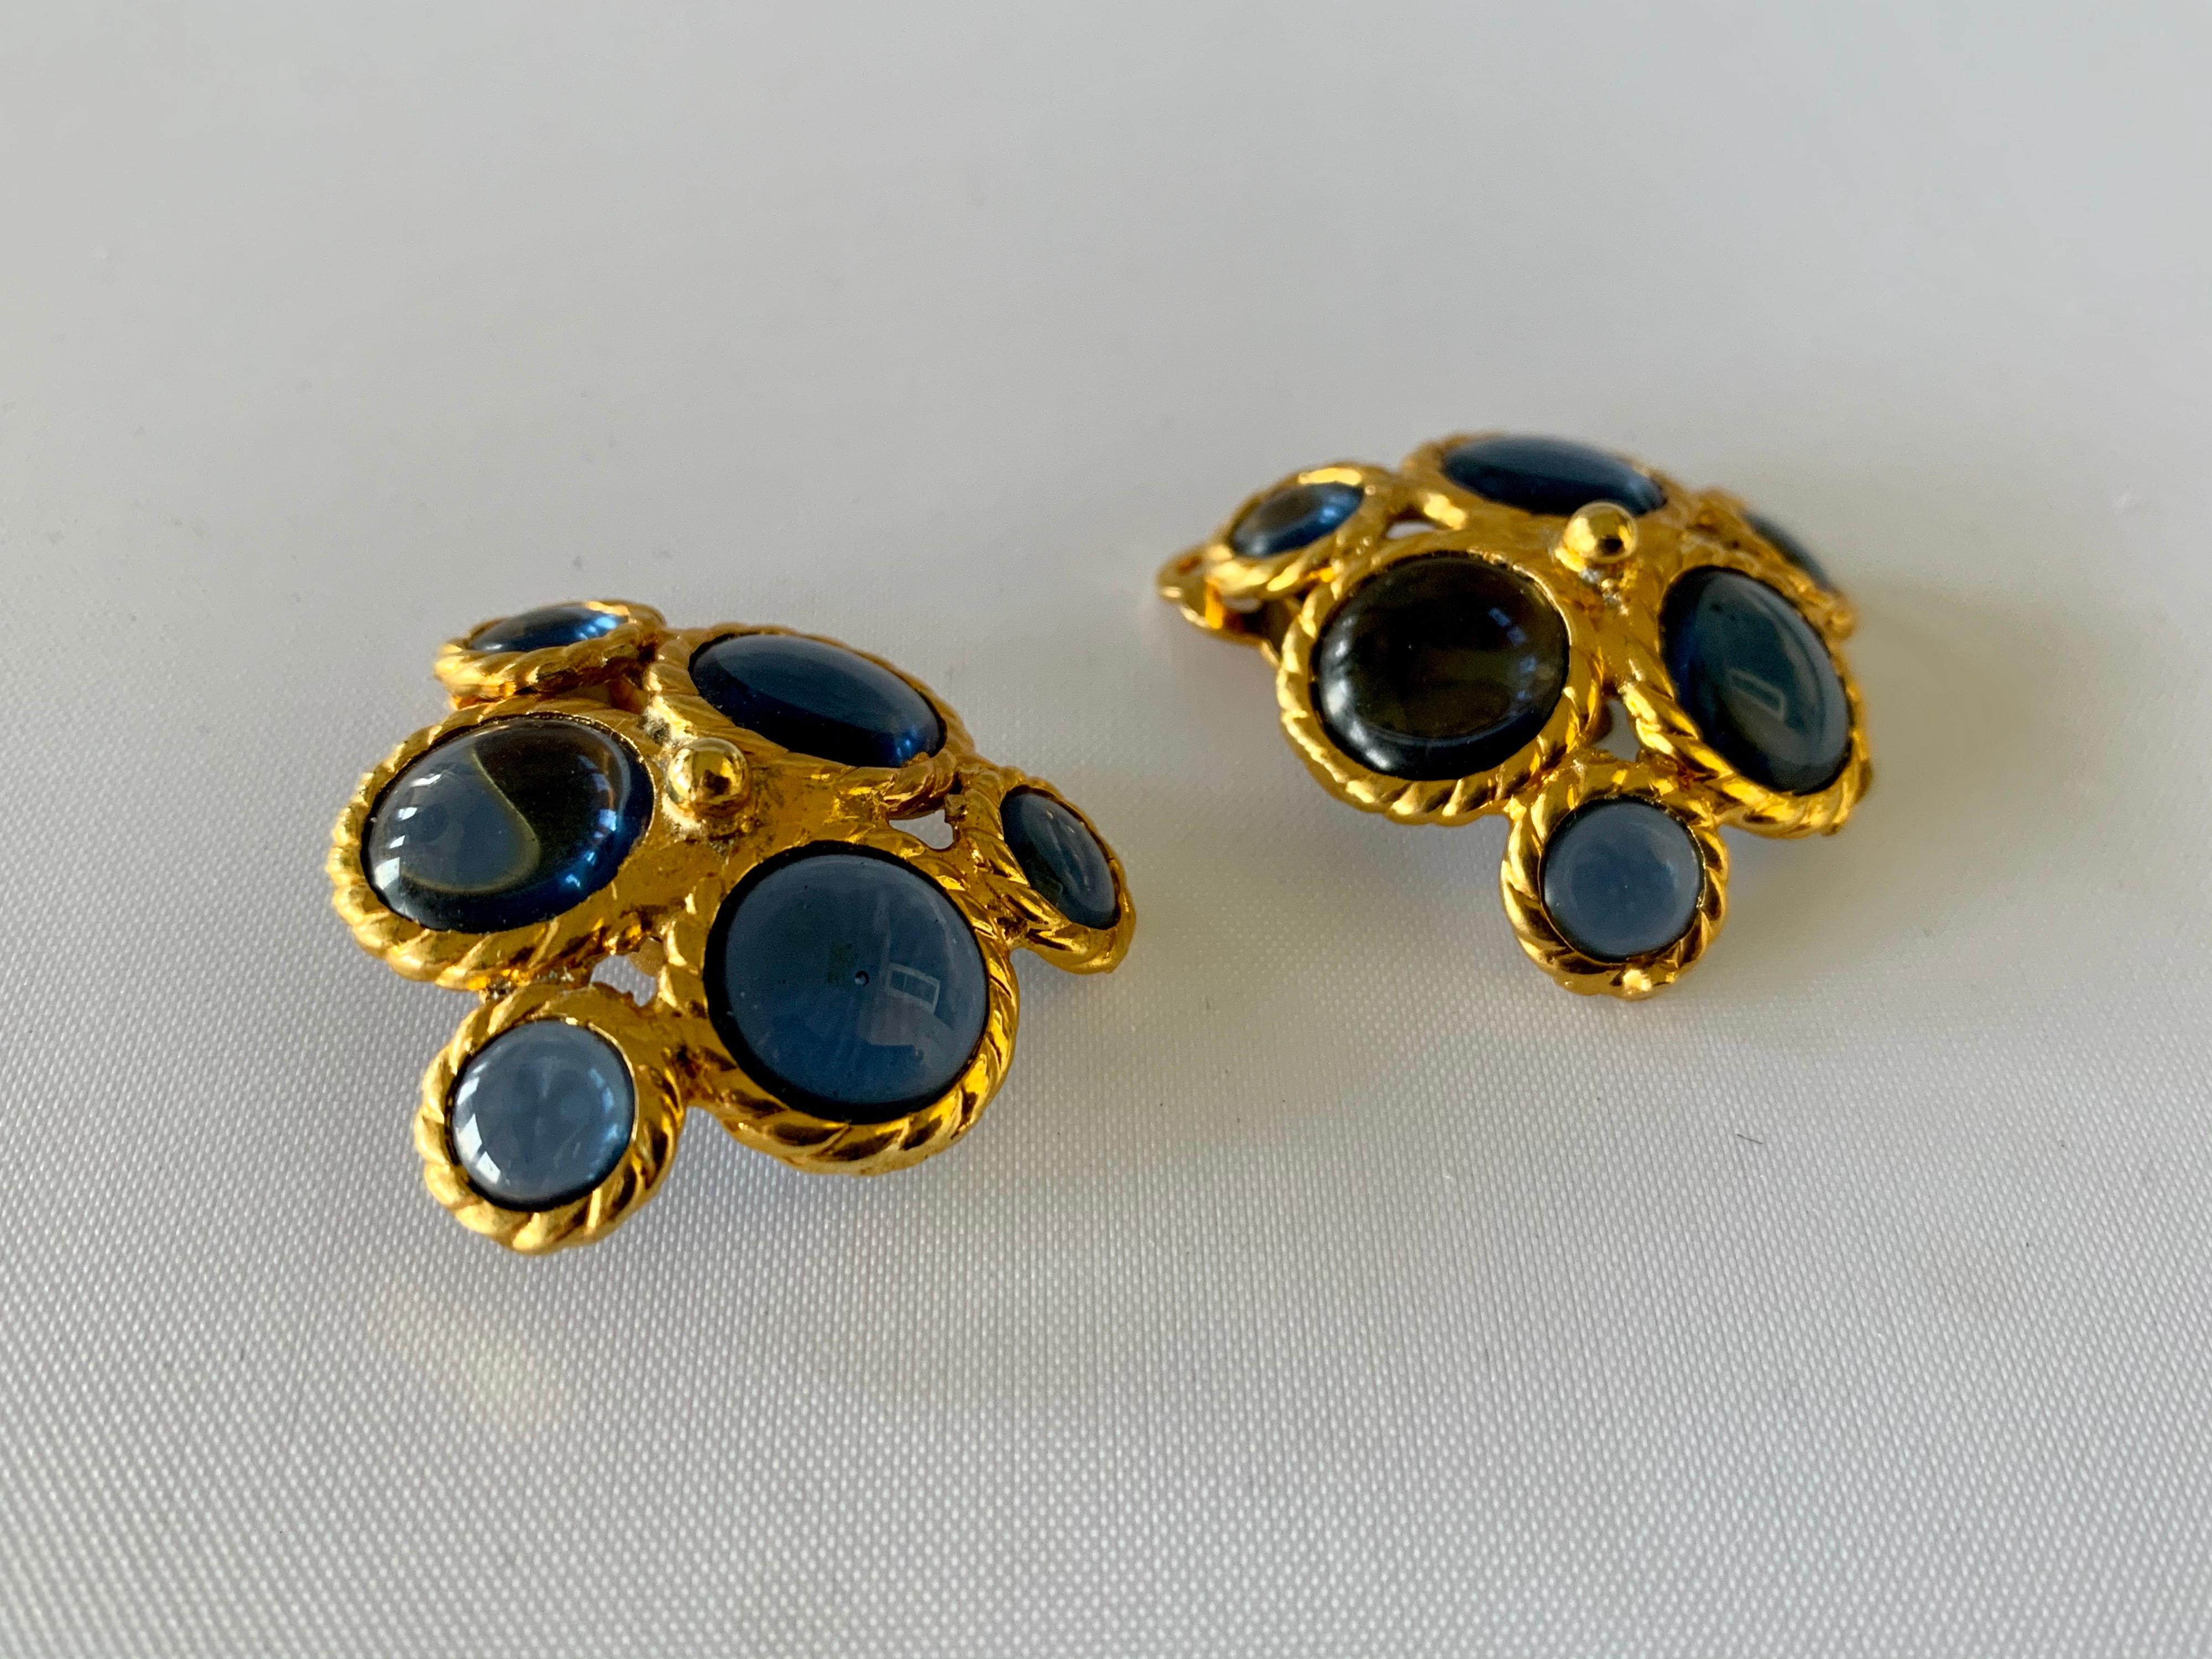 Vintage Coco Chanel Haute Couture statement earrings - comprised out of 